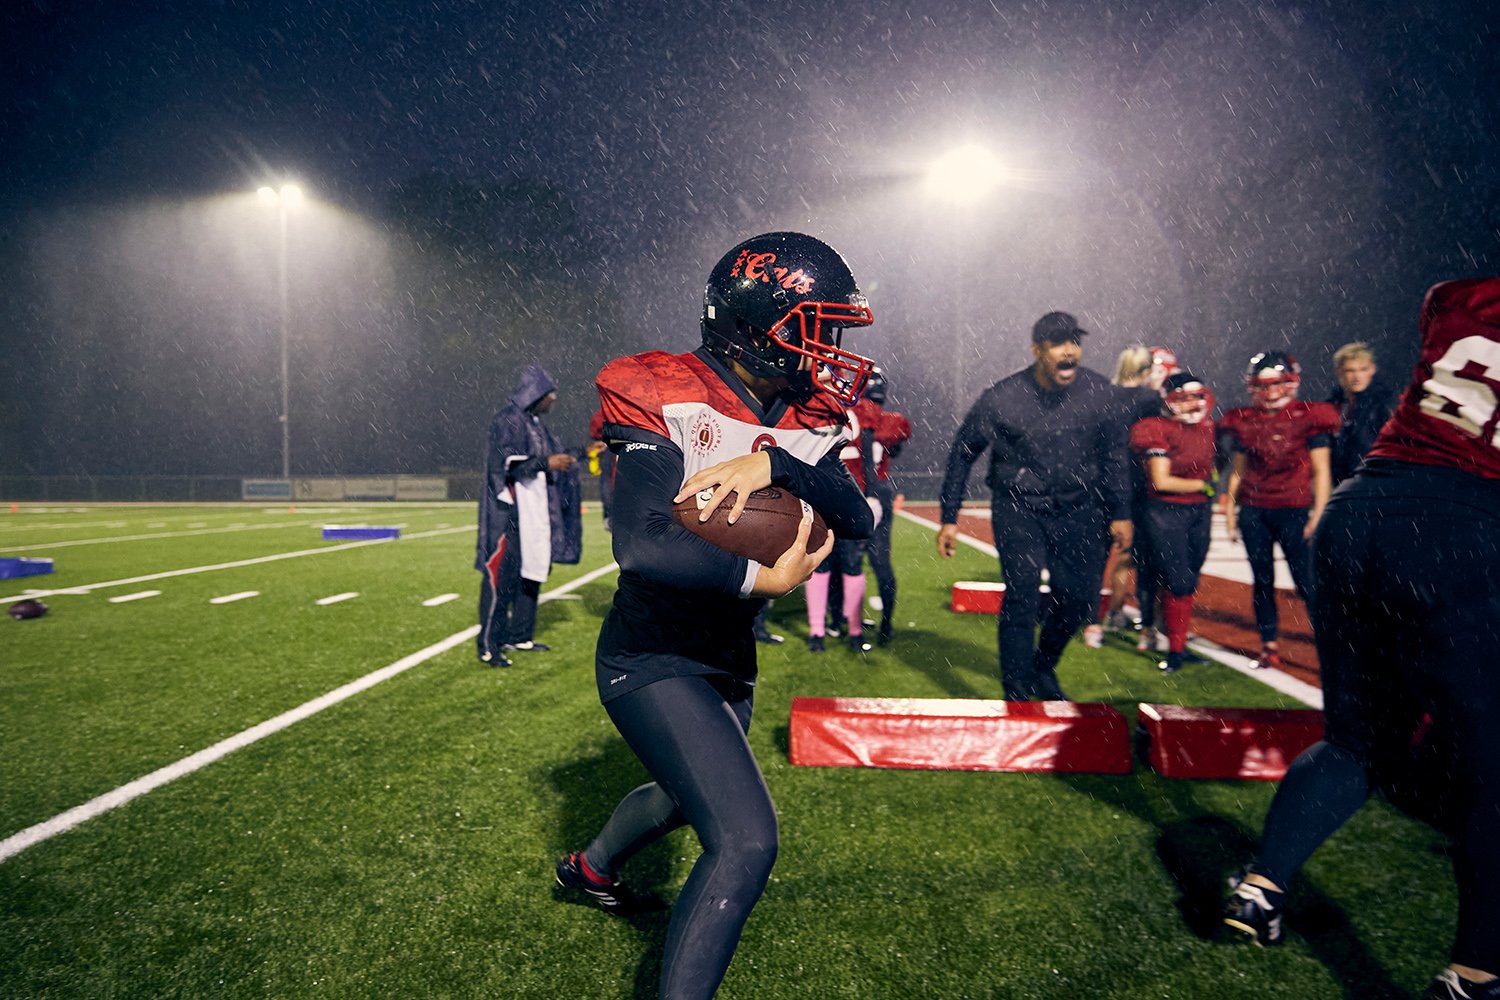  Kelly, the quarterback for the Amsterdam Cats, runs with the ball during a rain-soaked training session, Amsterdam, NL, 2020. 